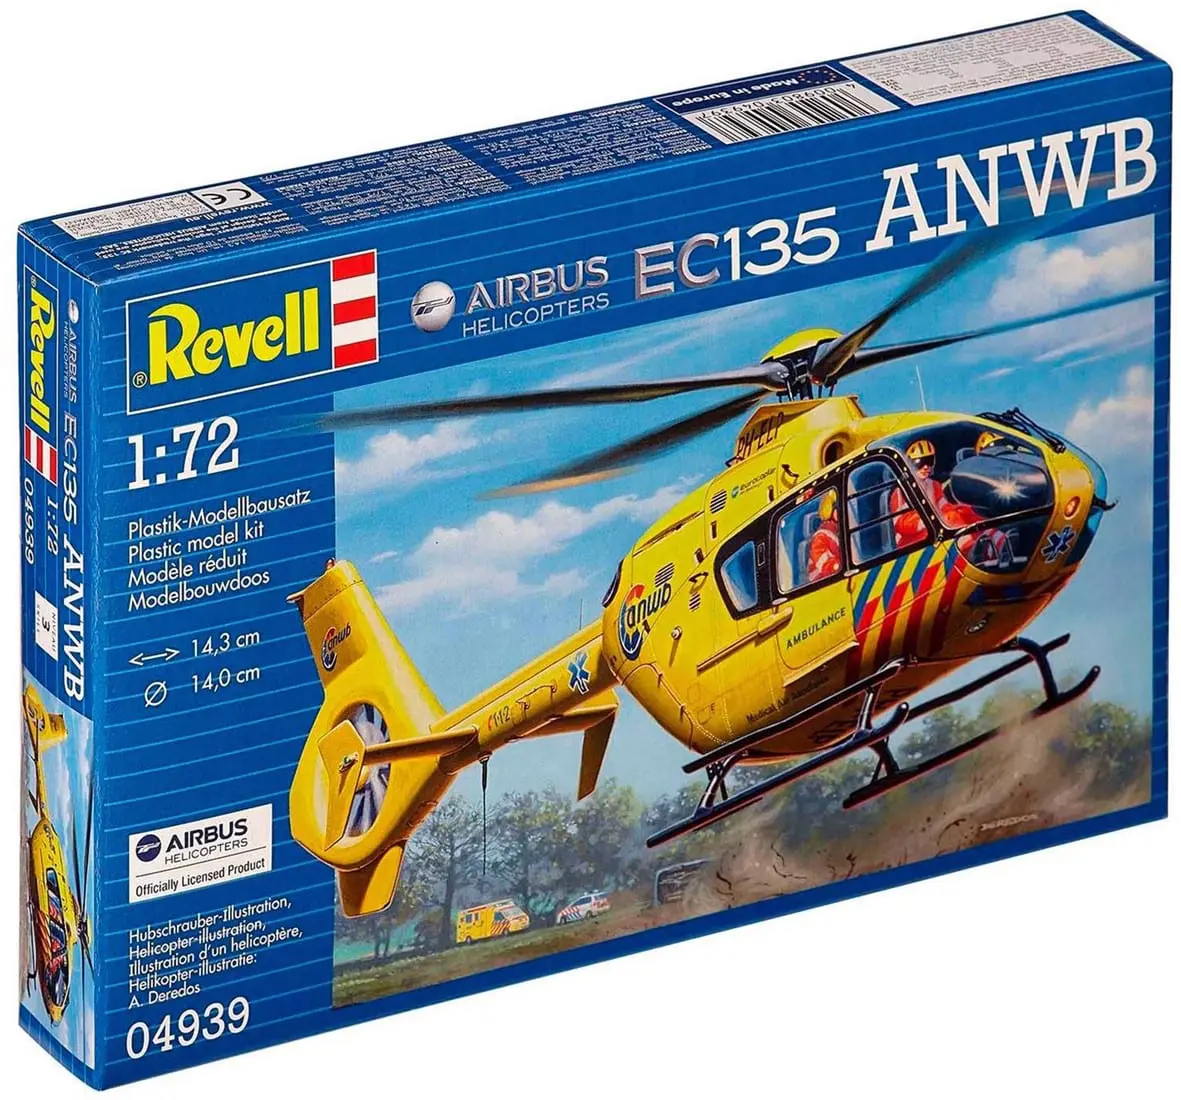 Airbus Helicopter EC135 ANWB RL64939 Revell Model Set 1:72 Scale 